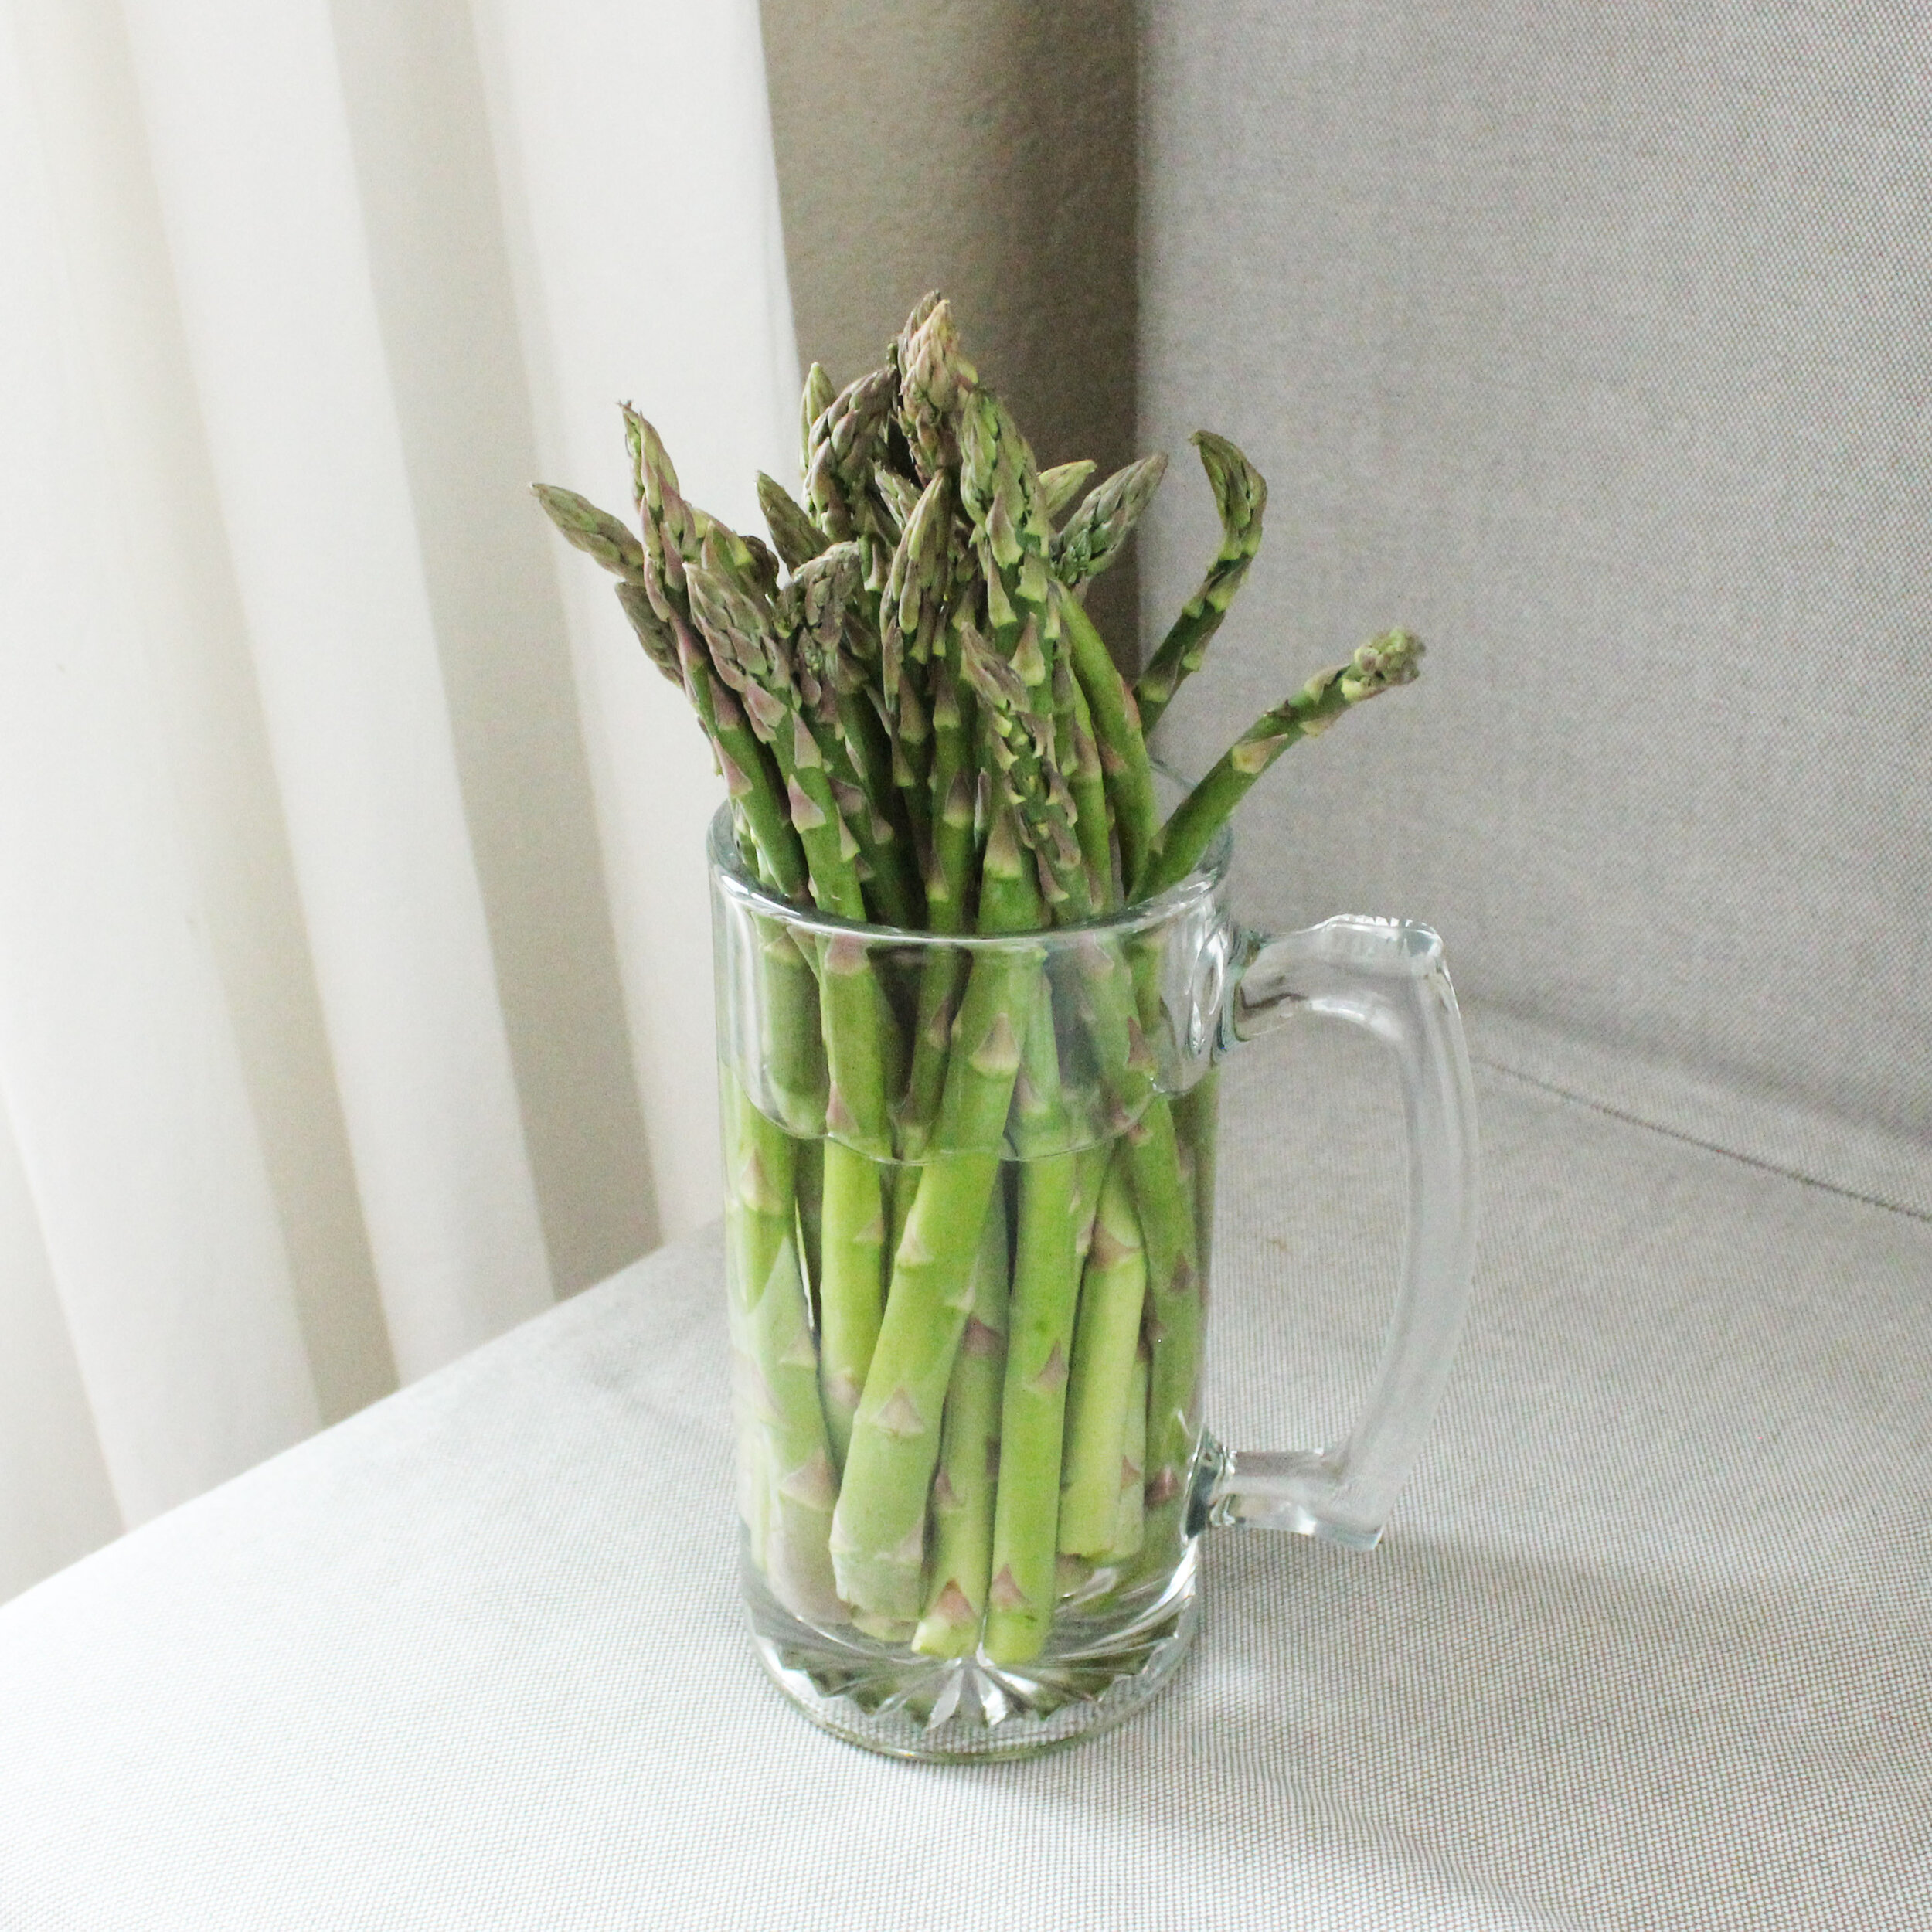 Store fresh asparagus like cut flowers, in a jar or vase with fresh water.